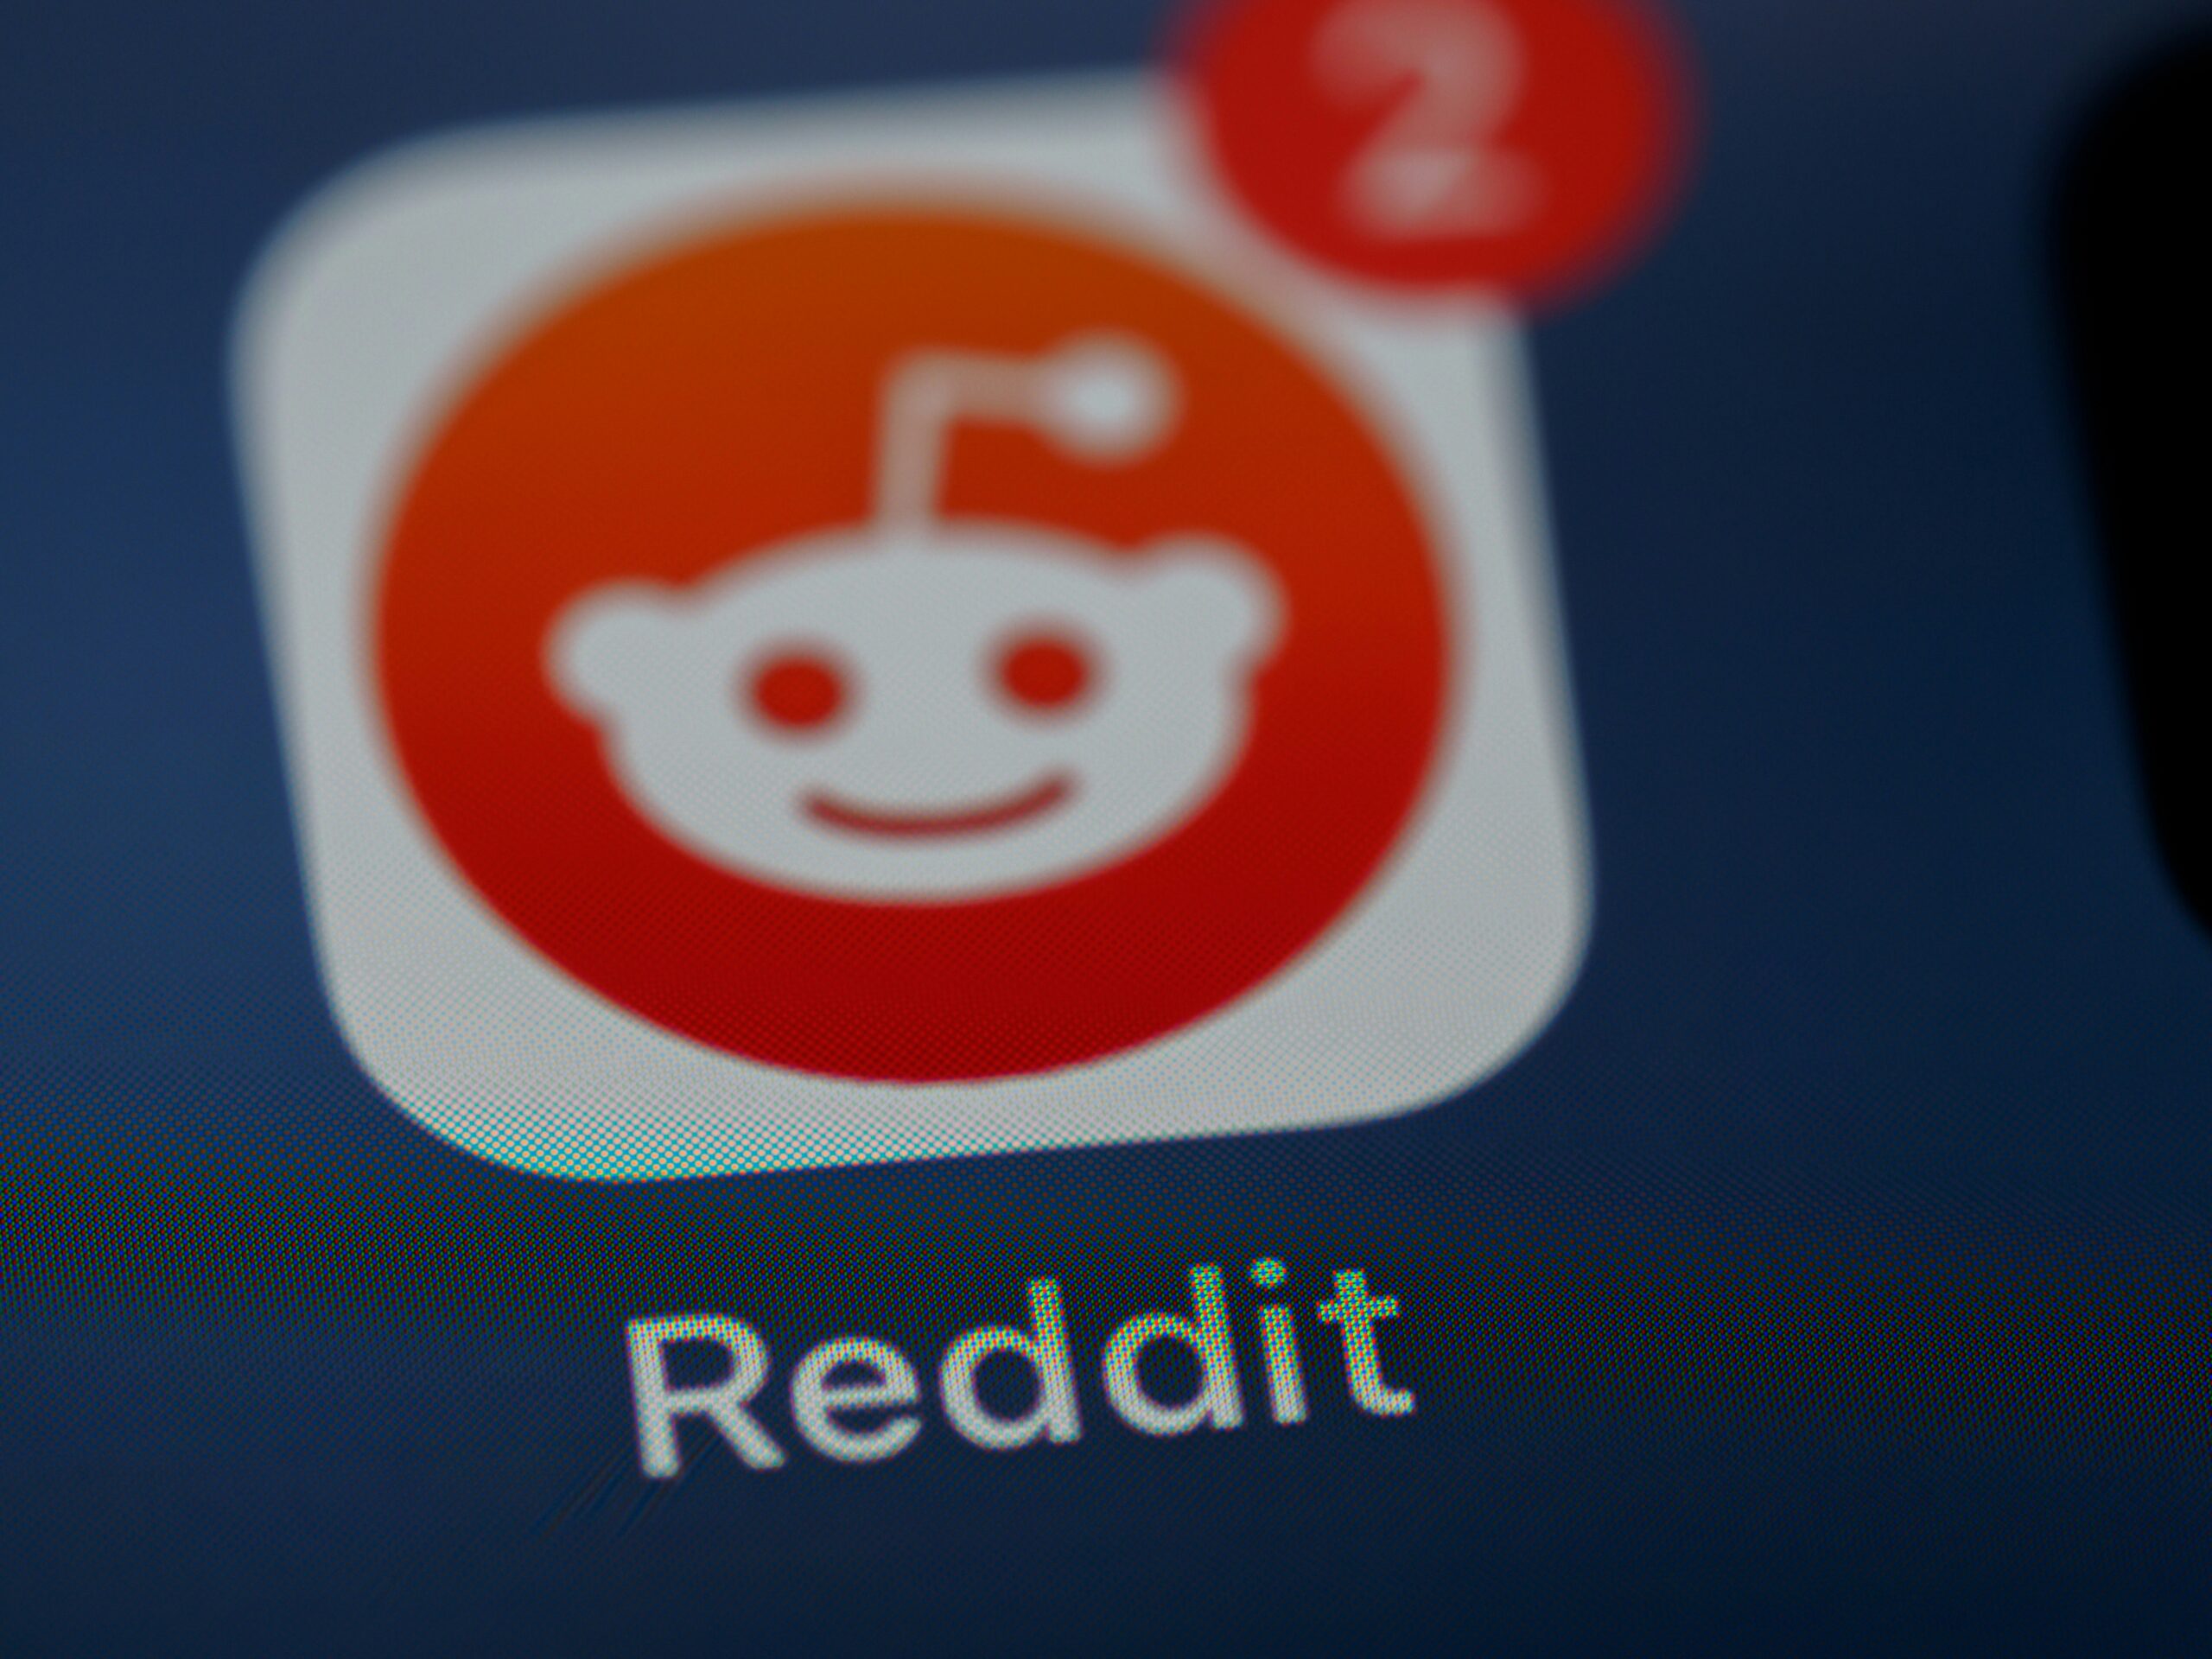 How to find someone's Reddit account 5 Proved methods